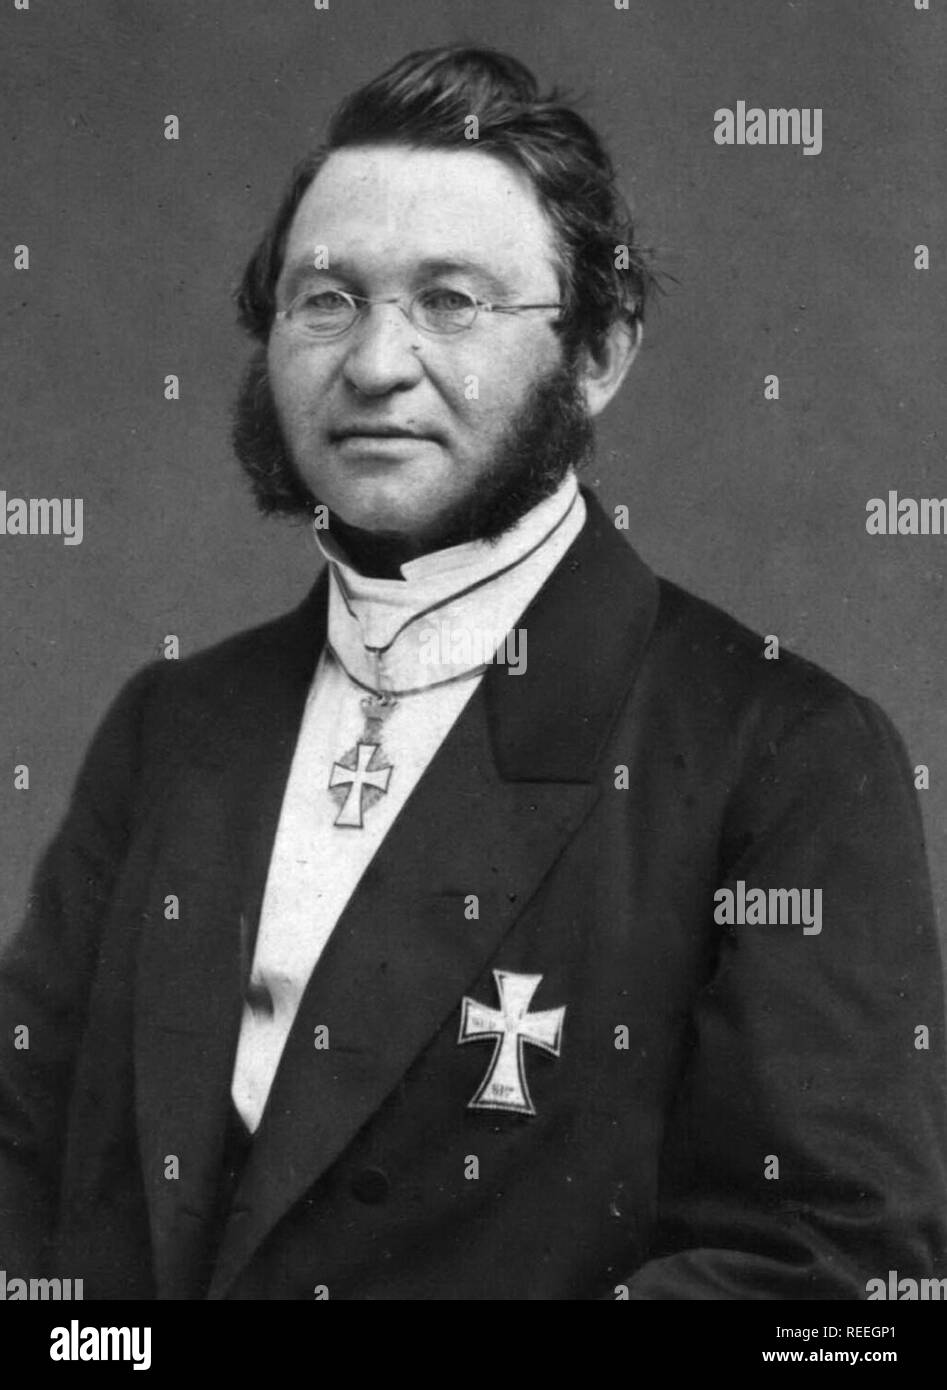 Christen Andreas Fonnesbech (1817 – 1880) Danish politician. He was Council President of Denmark from 1874 to 1875 as the leader of the Cabinet of Fonnesbech. Stock Photo